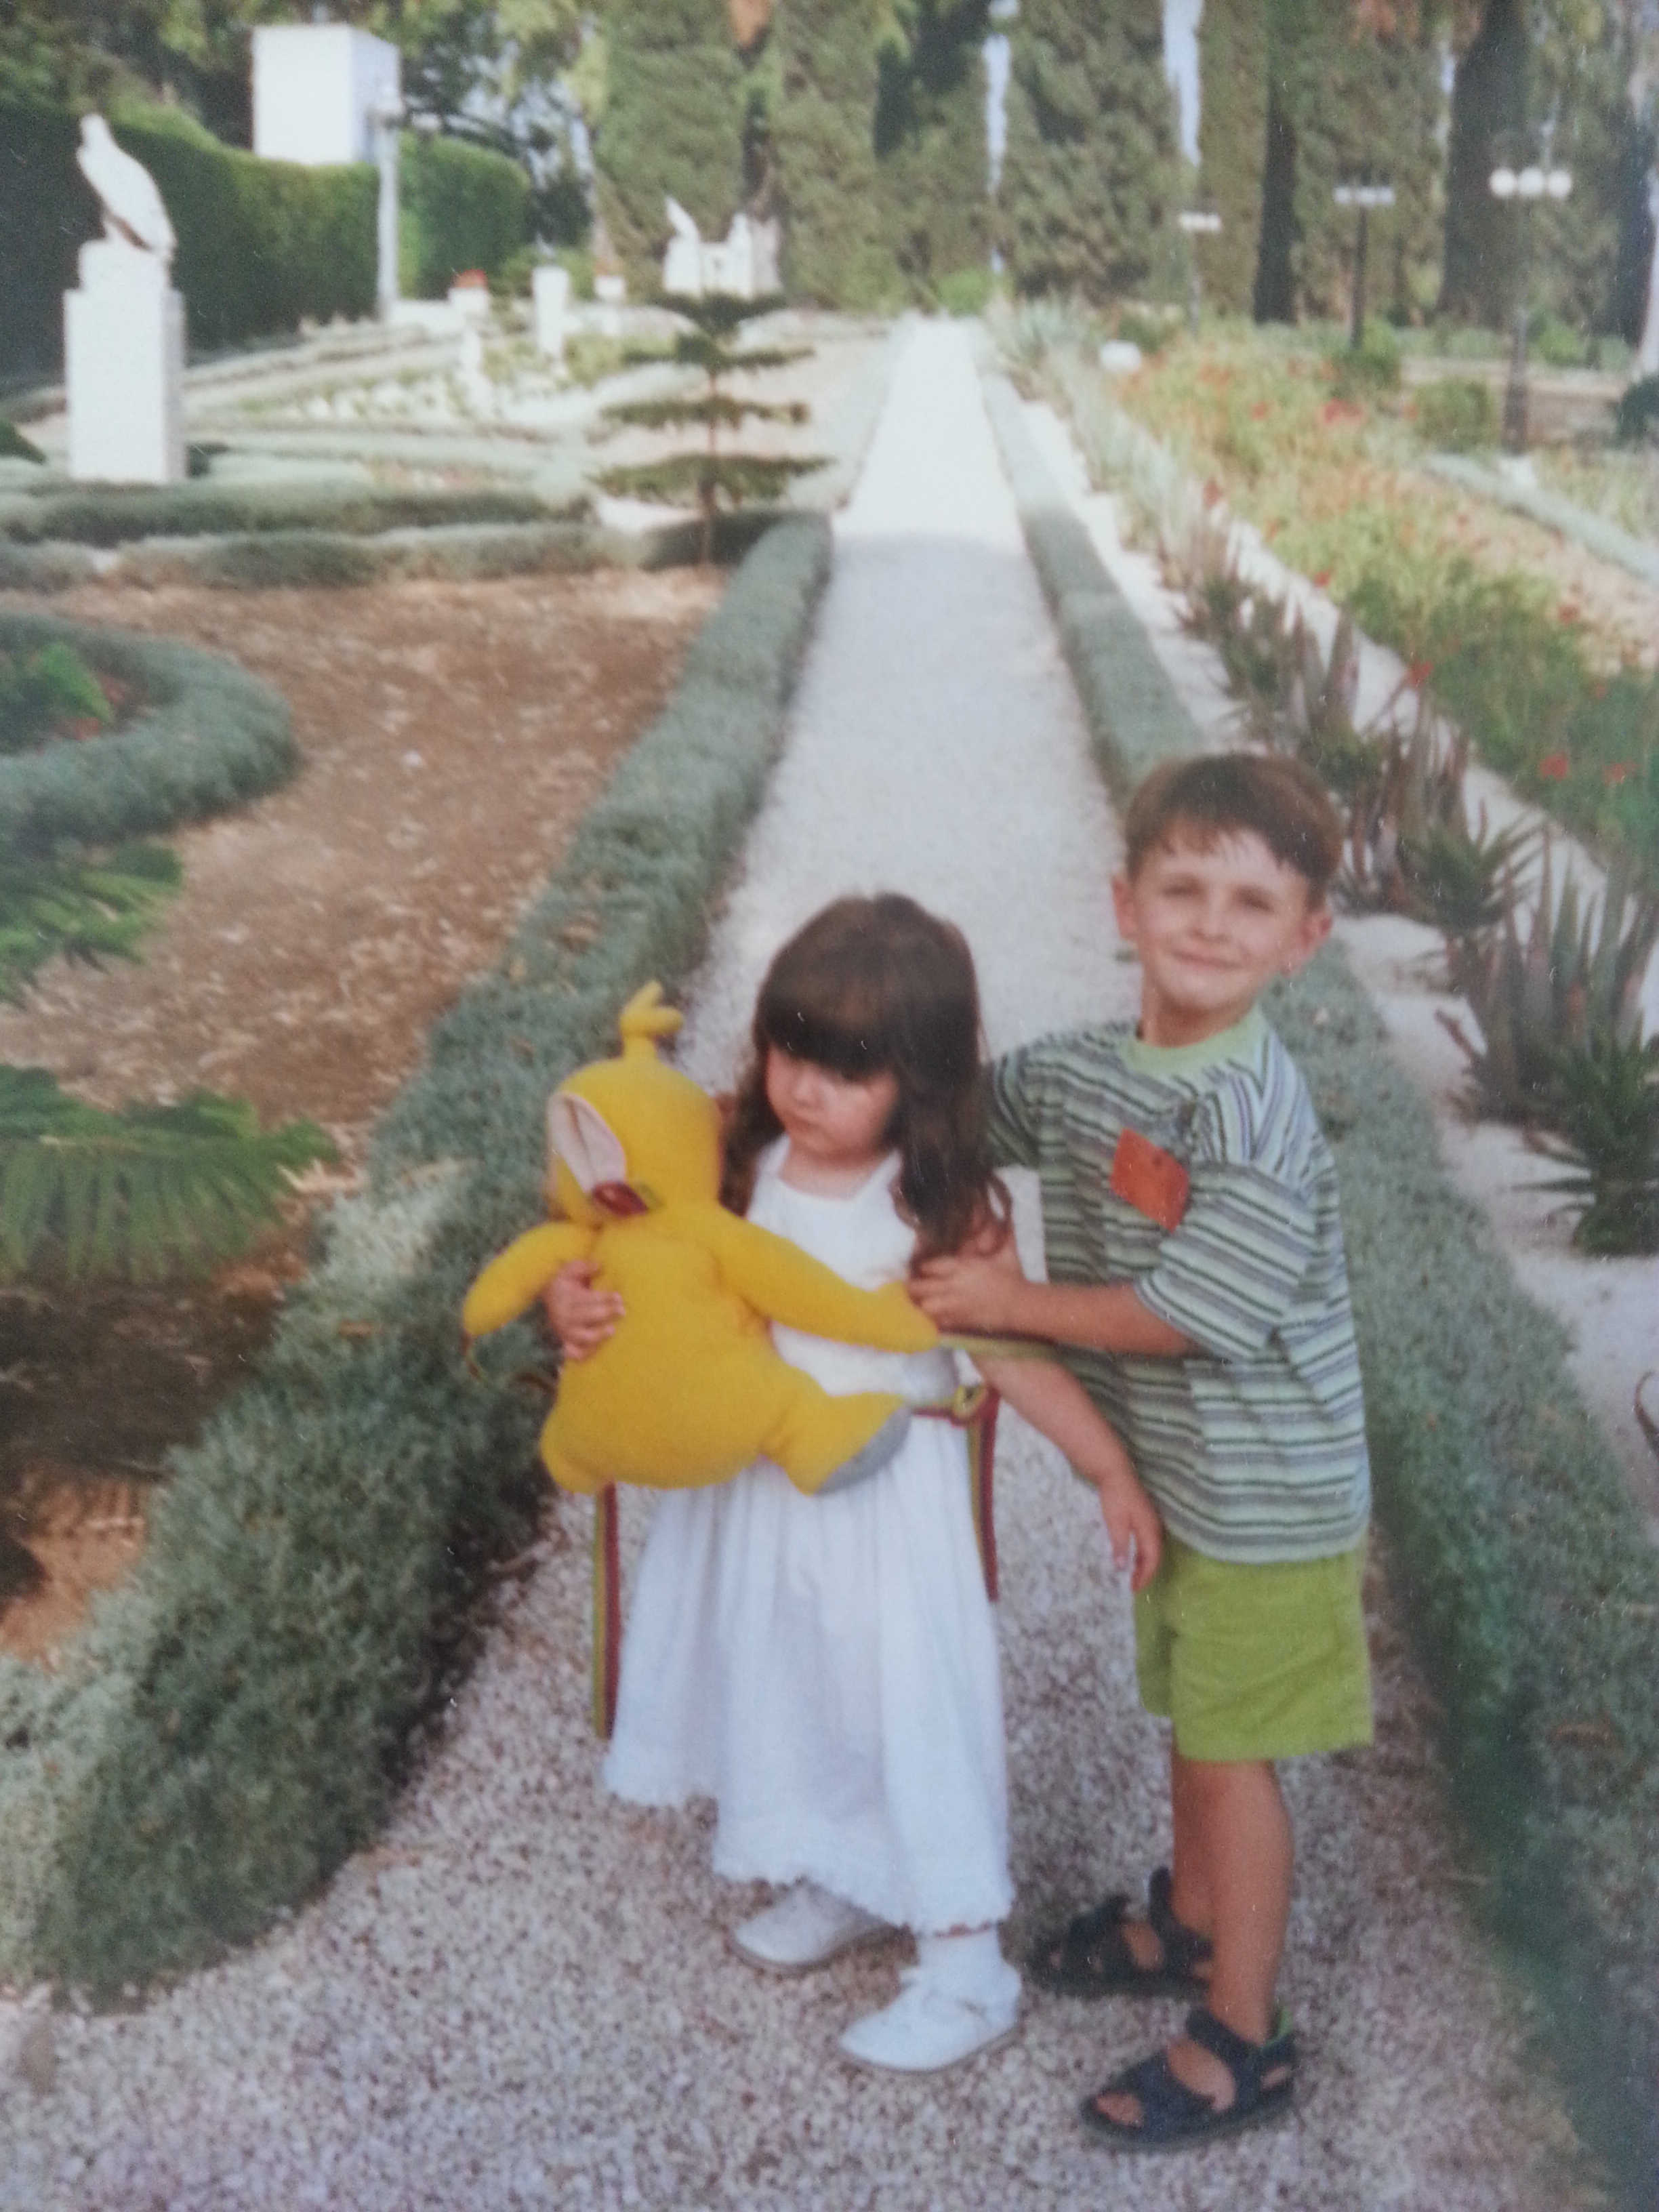 Farrah holding Lala (Teletubbie) with her brother trying to get her to look and smile at the camera in the gardens of Baha'u'llah in Akka, Israel